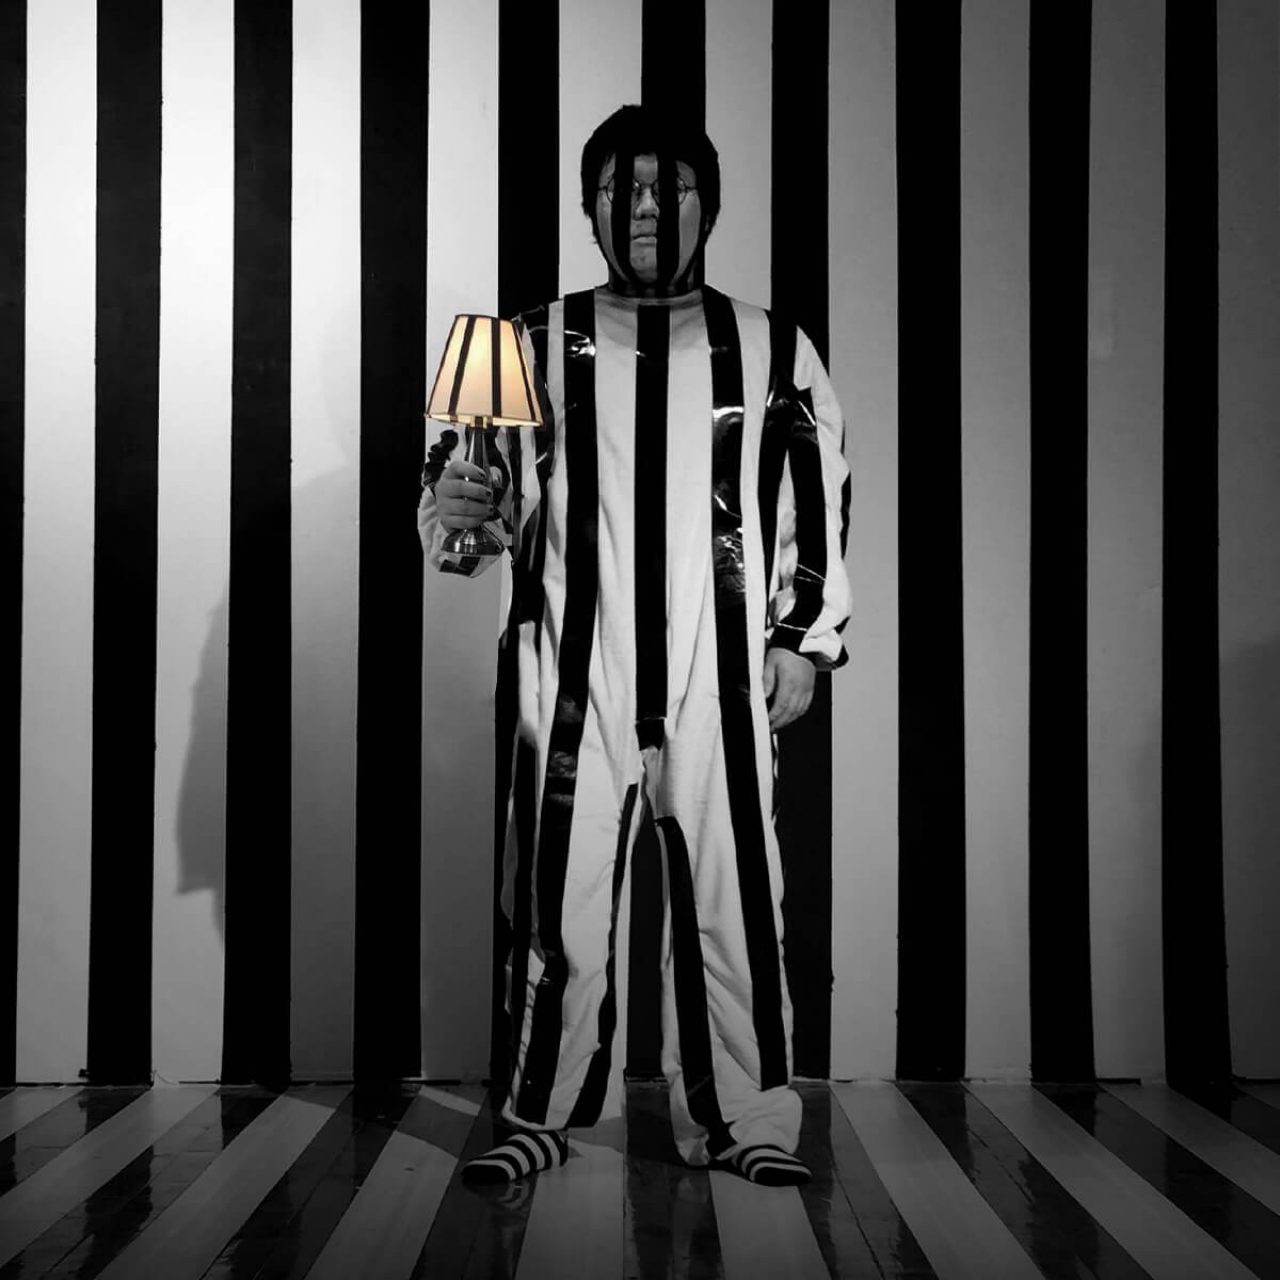 Songlin Li stands with a lamp and shade in his hand against a black and white vertically striped backdrop. The lamp and suit he wears is also striped.